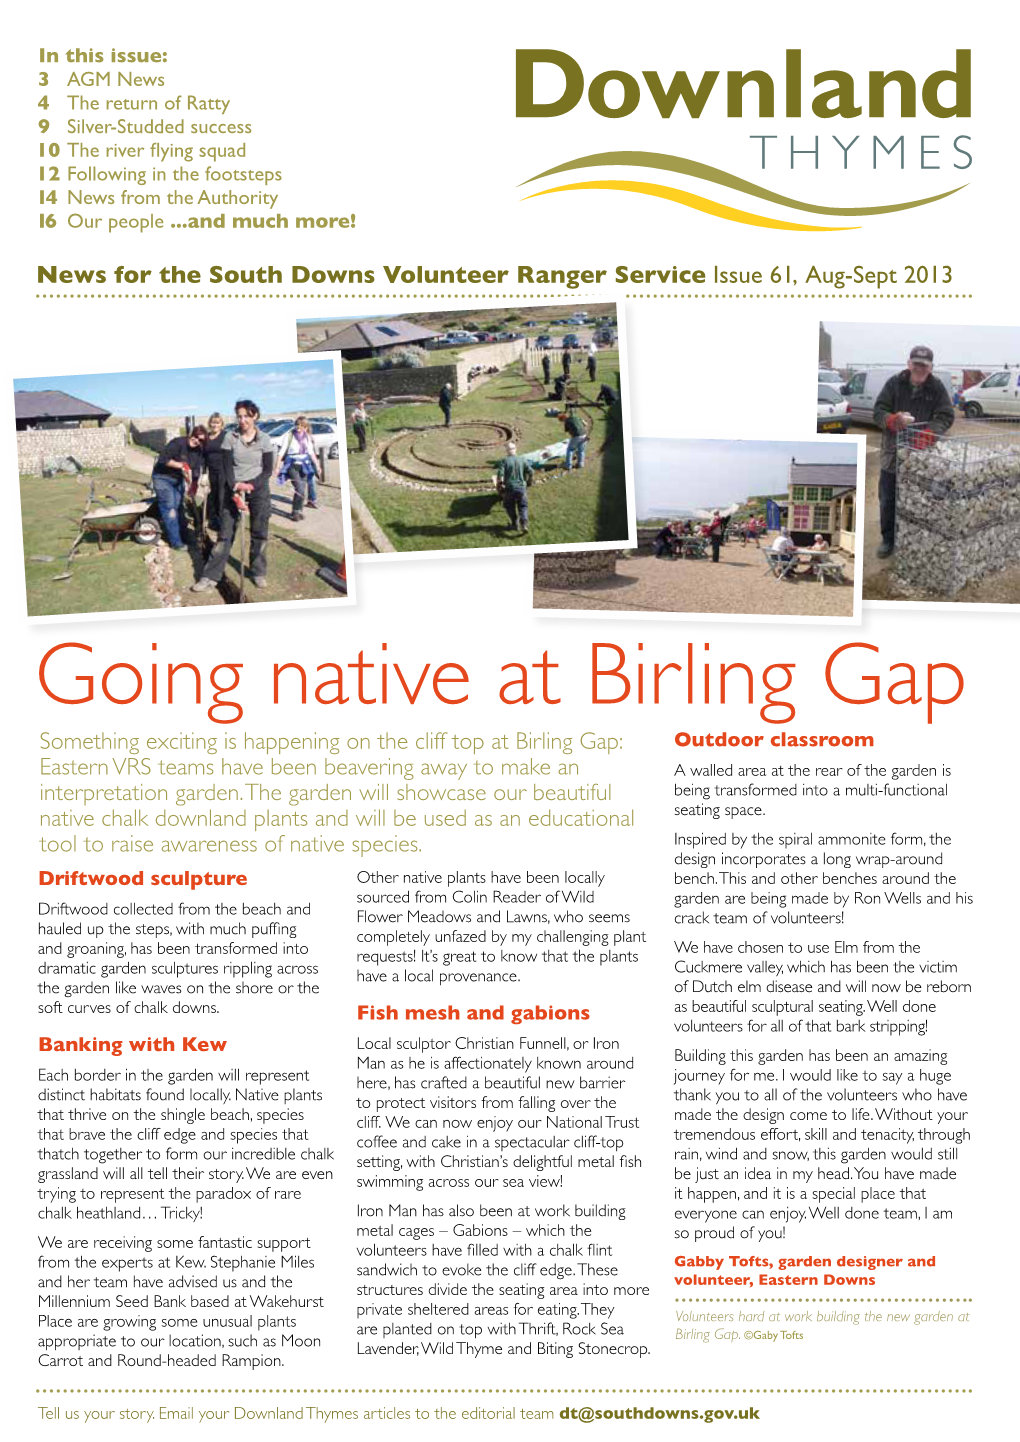 Going Native at Birling